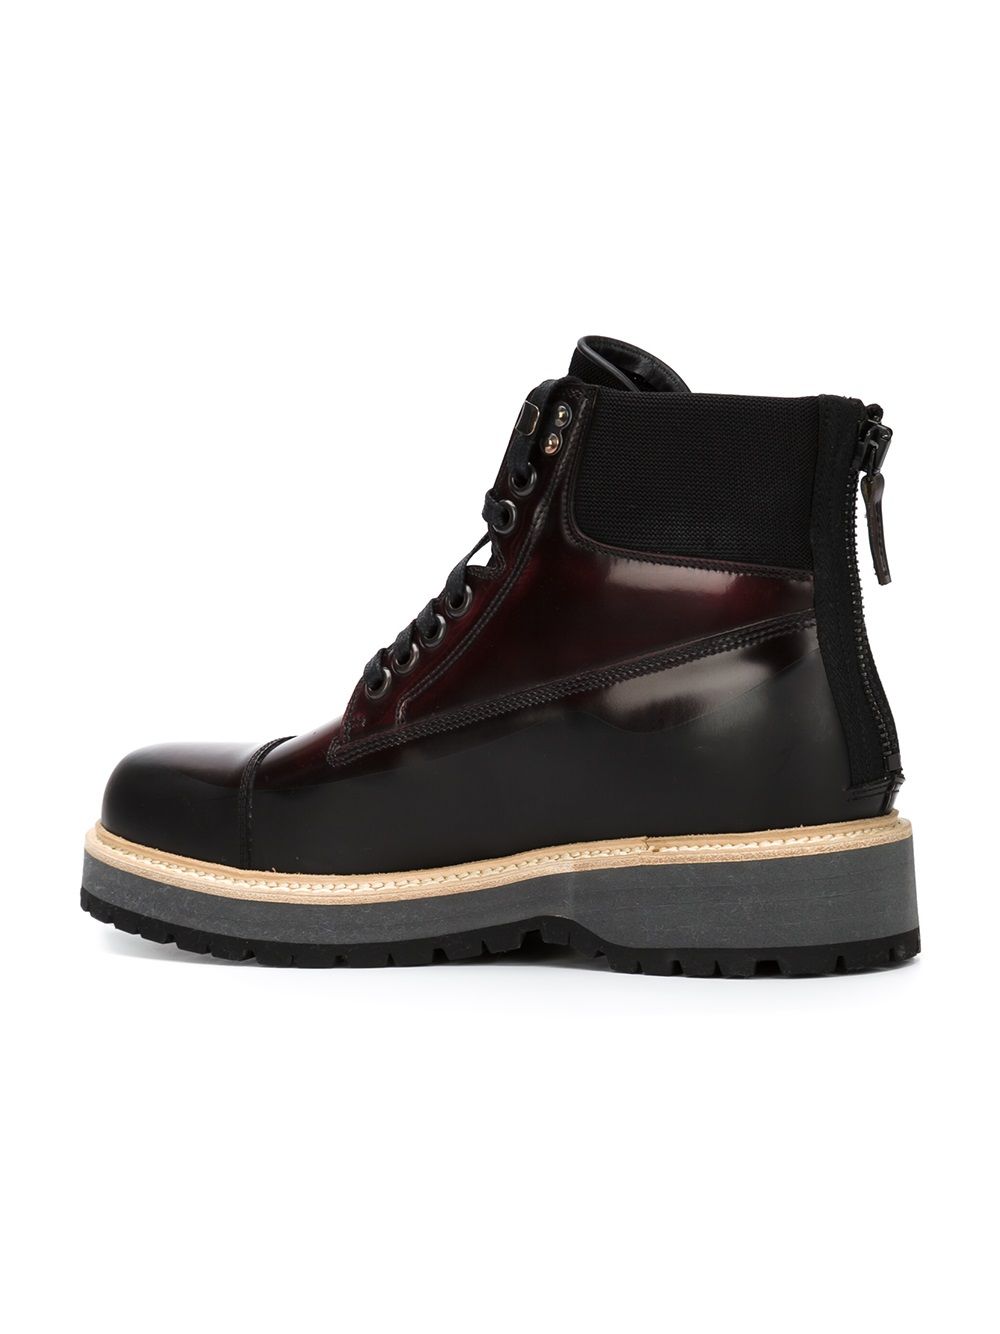 Marc Jacobs Lace-up Boots - Farfetch